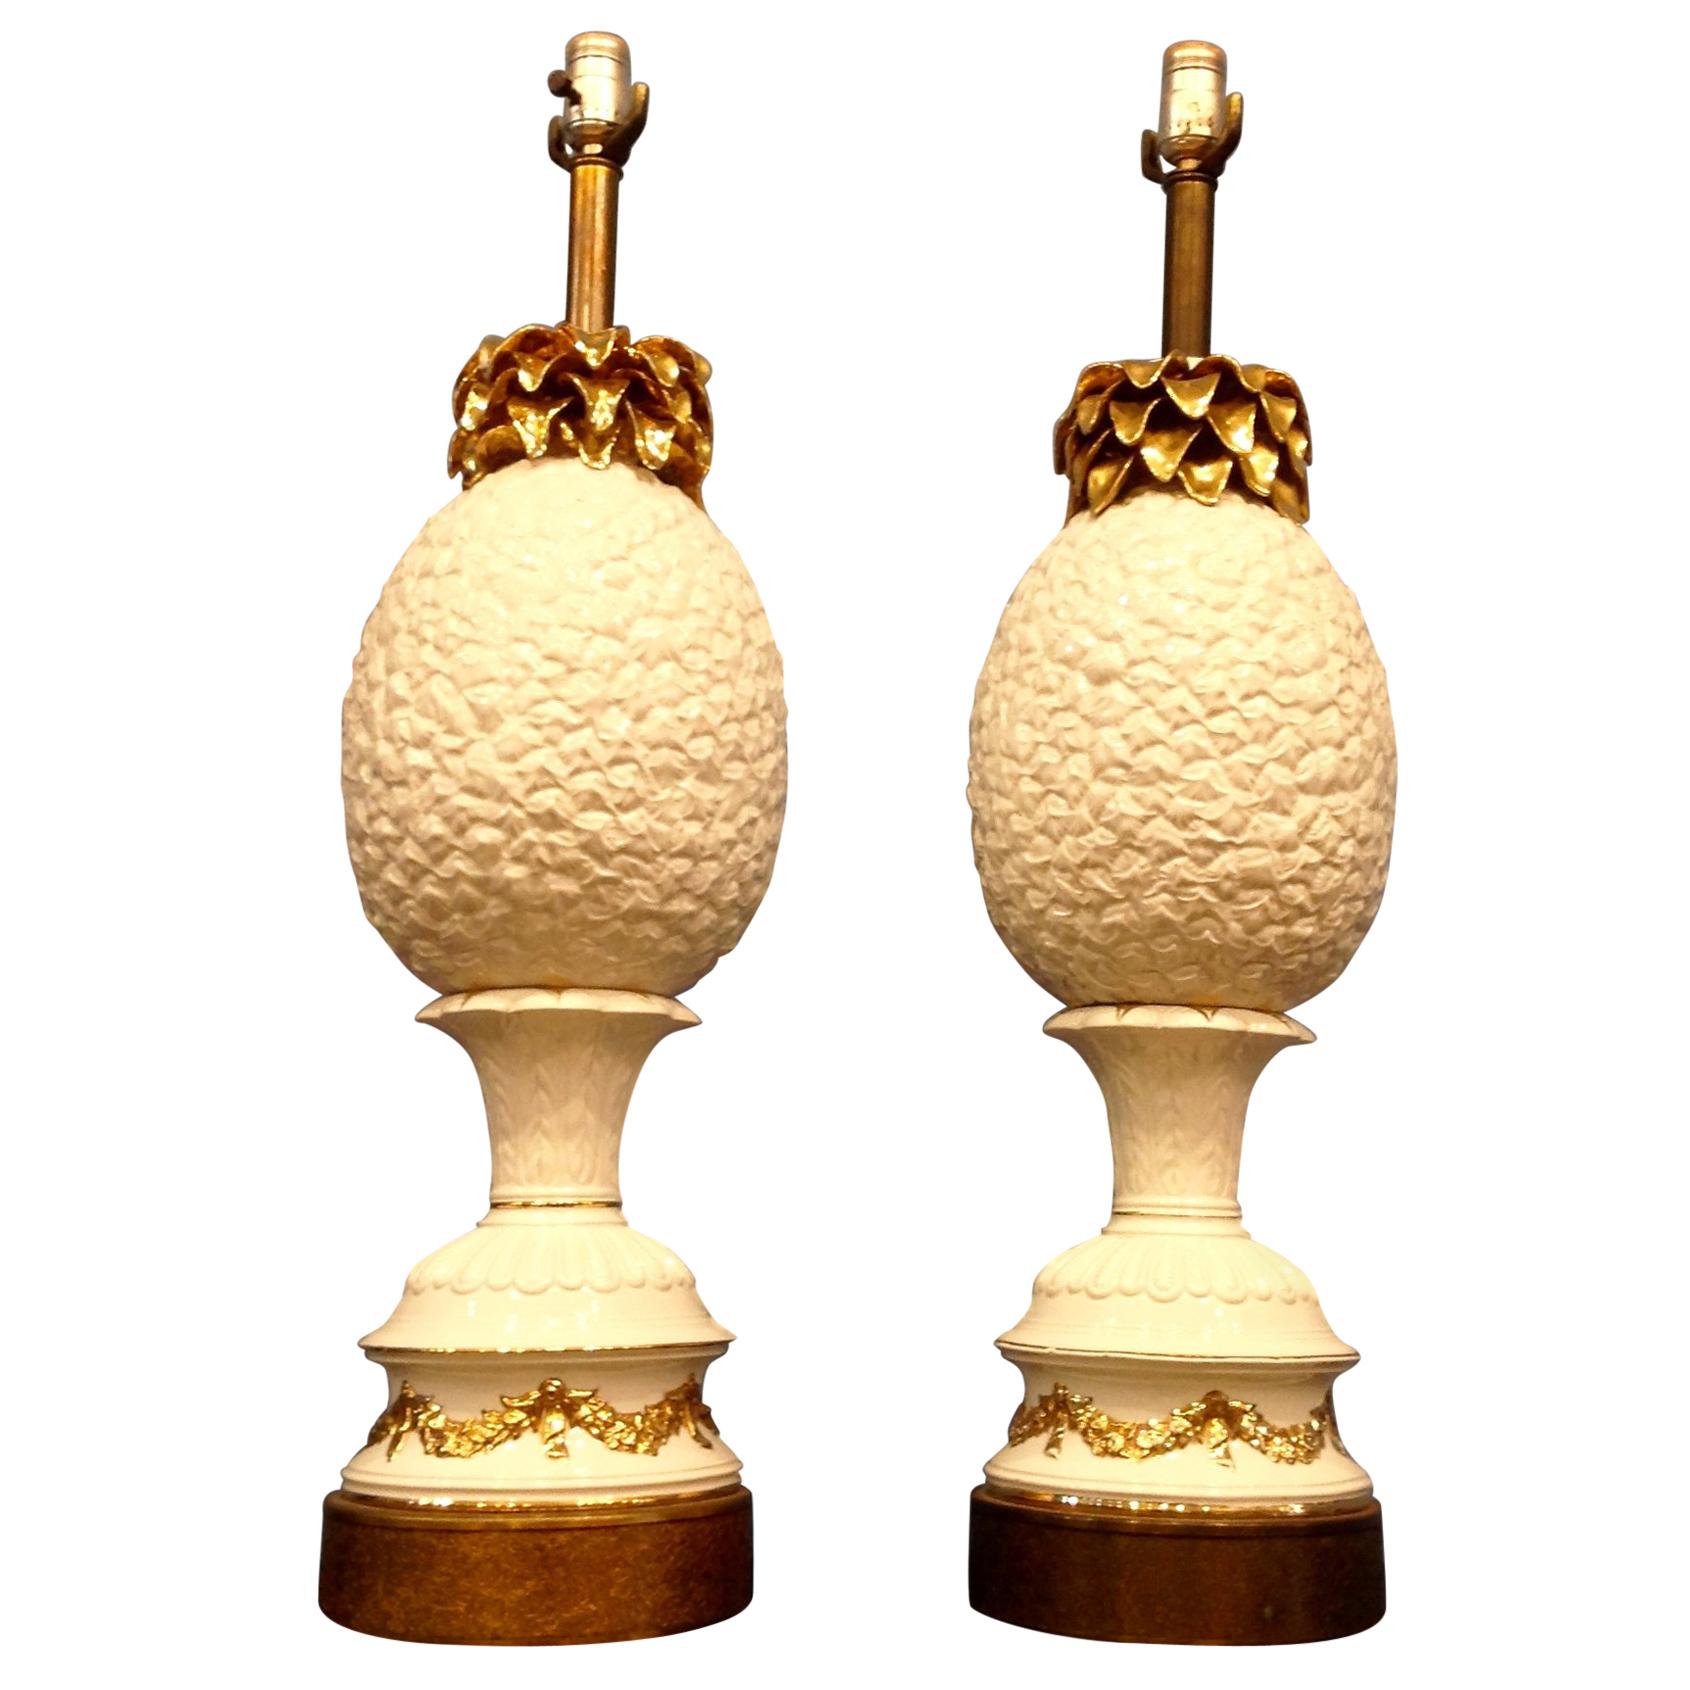 Pair of Enormous "Pineapple" Lamps